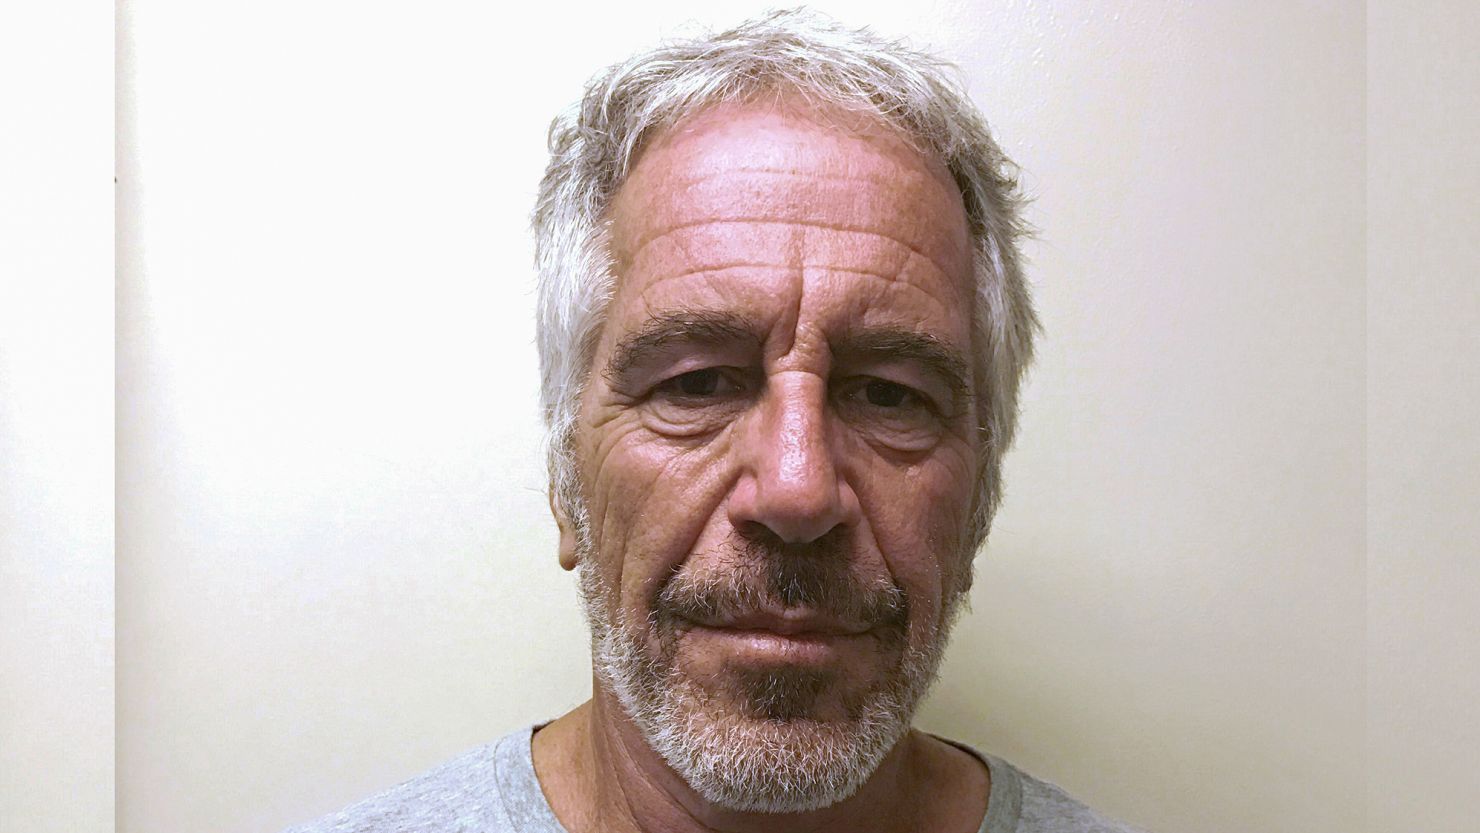 The lawsuits accuse JPMorgan and Deutsche Bank of turning a blind eye to the late Jeffrey Epstein's abuse of women because he was an important client.